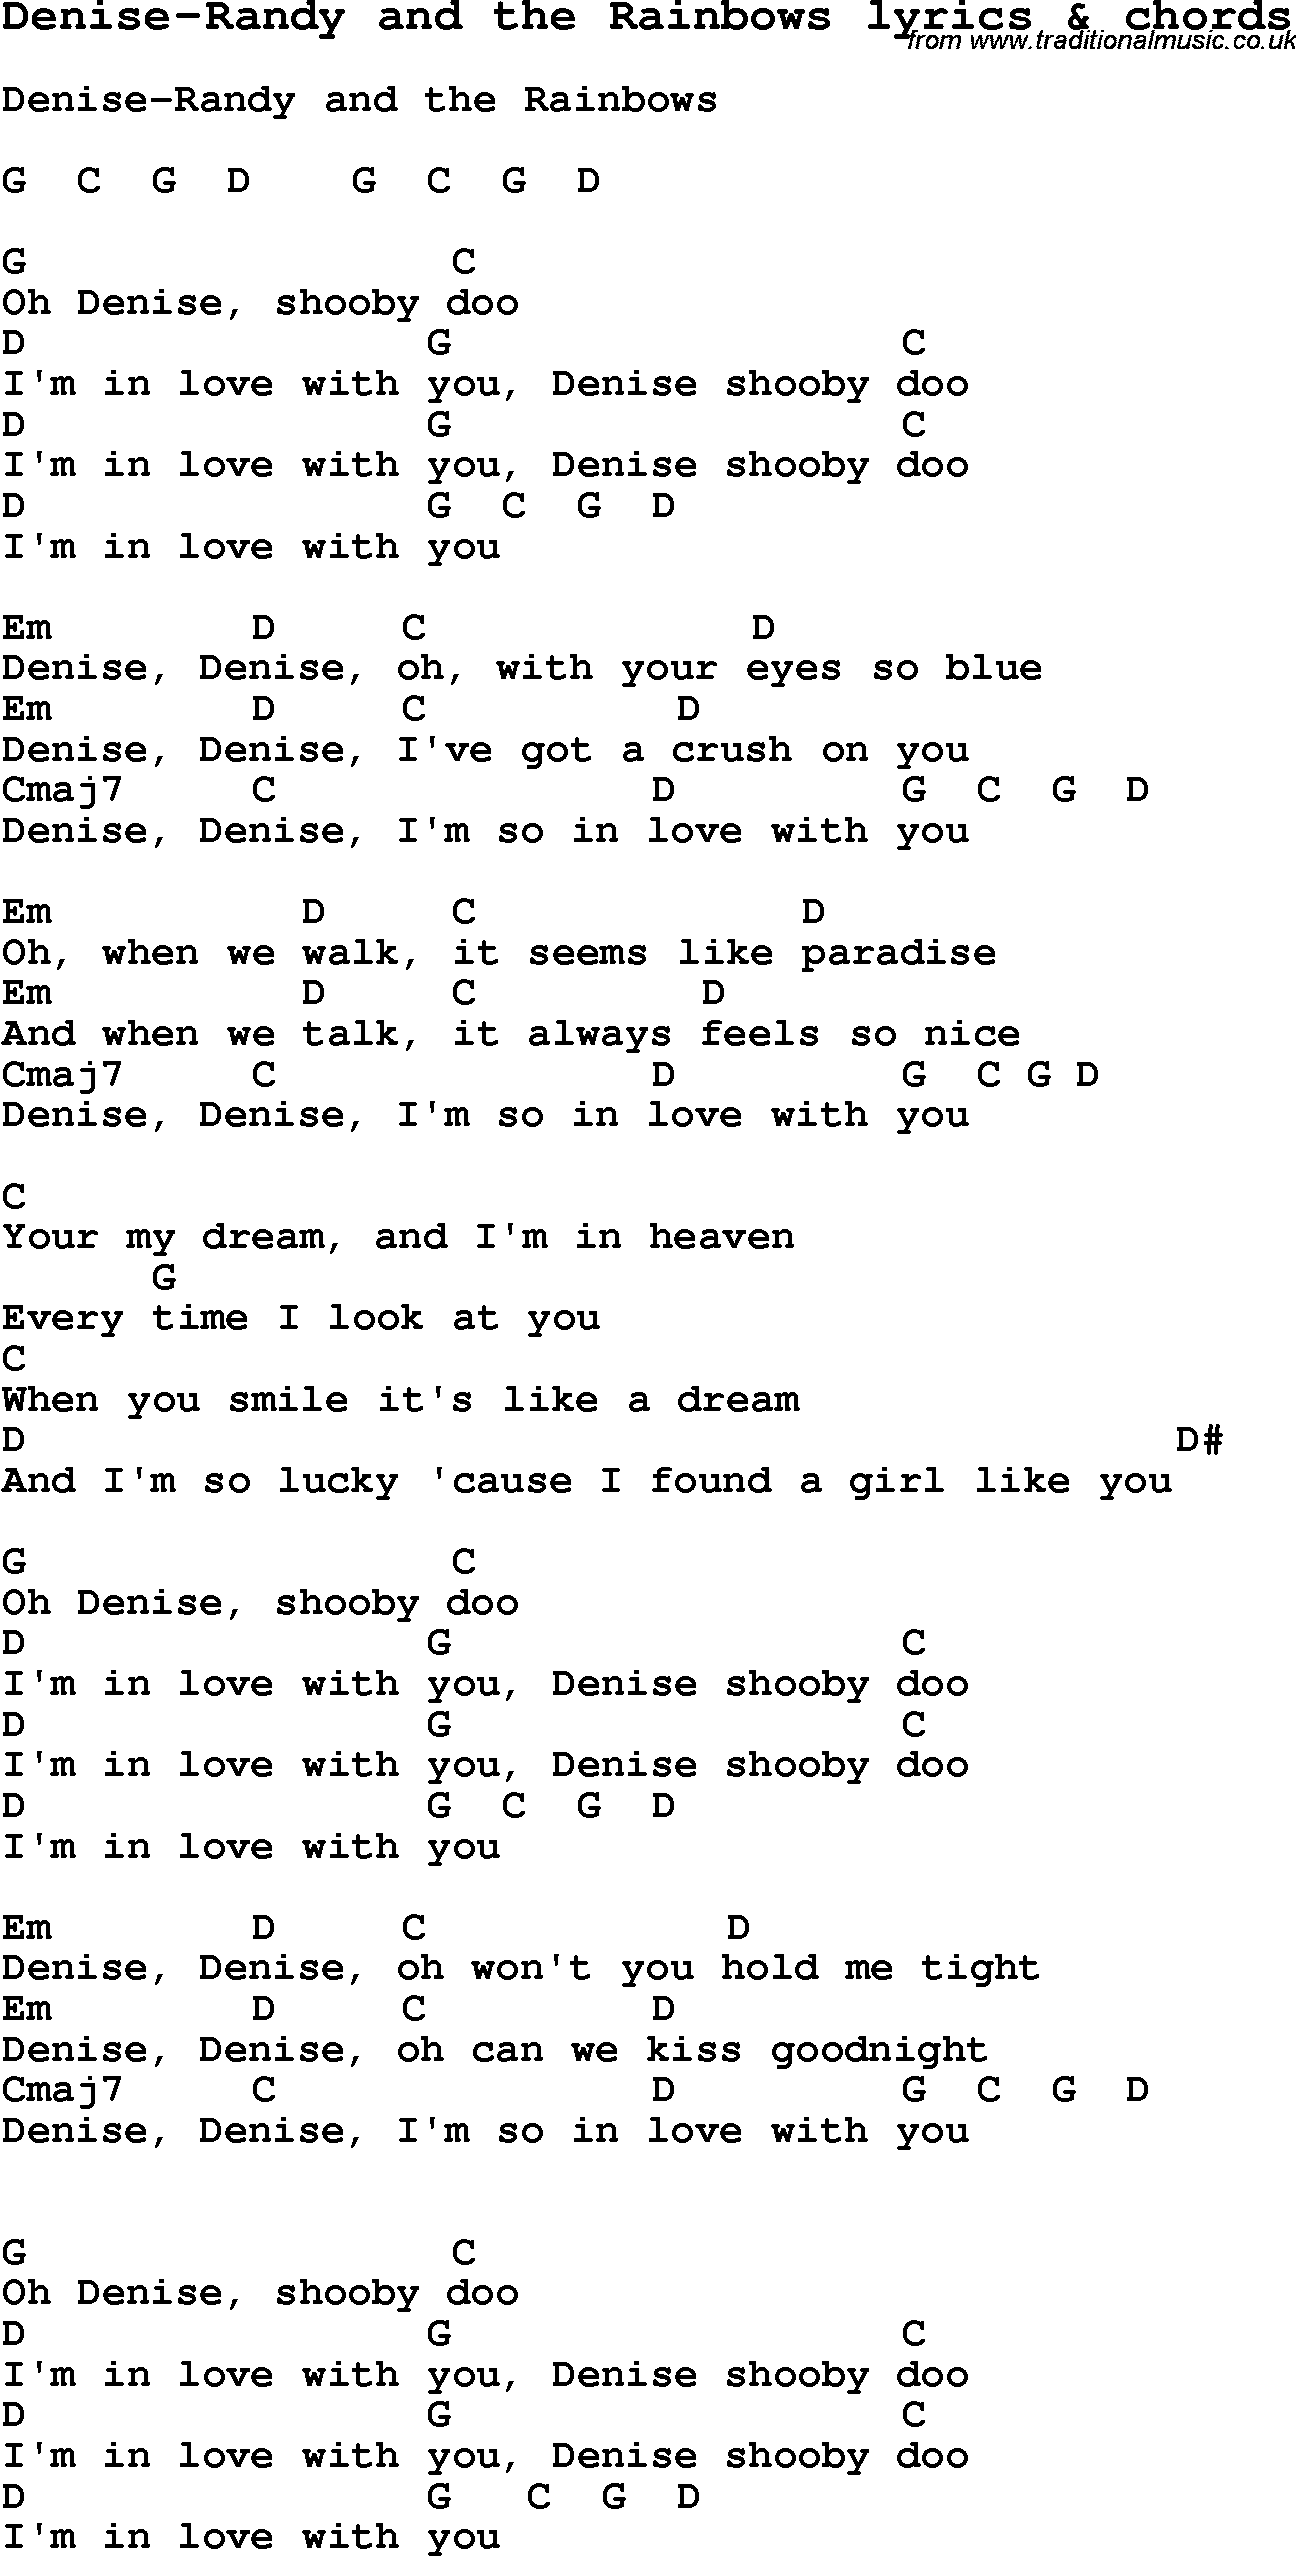 Love Song Lyrics for: Denise-Randy and the Rainbows with chords for Ukulele, Guitar Banjo etc.